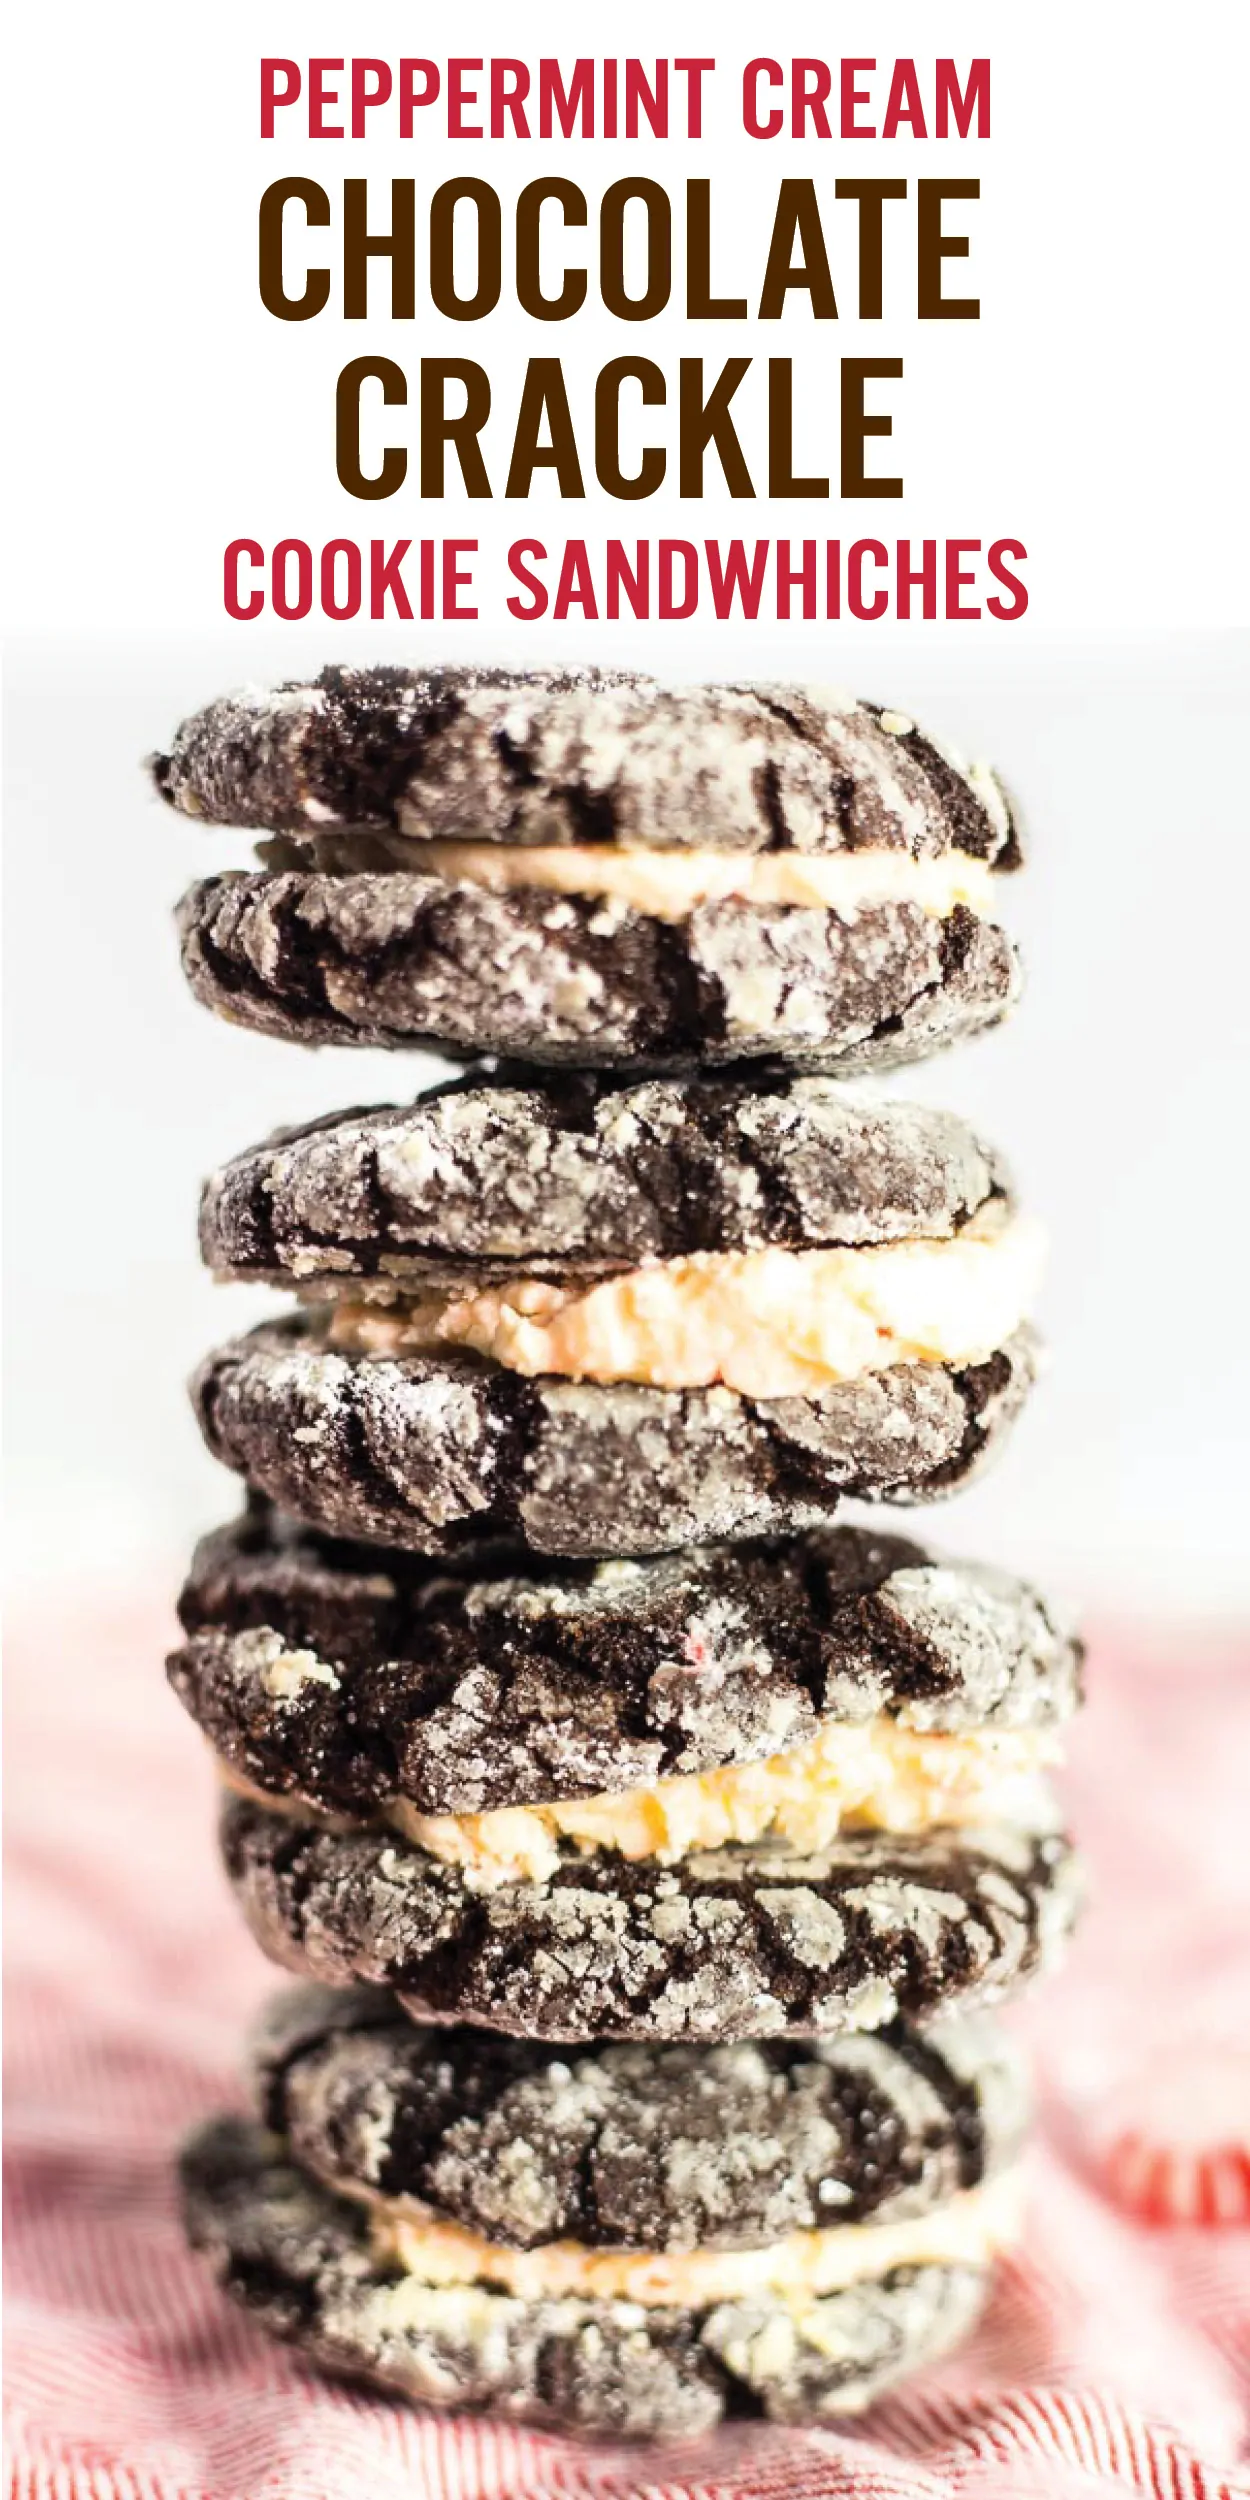 Peppermint Buttercream Chocolate Crackle Cookie Sandwiches